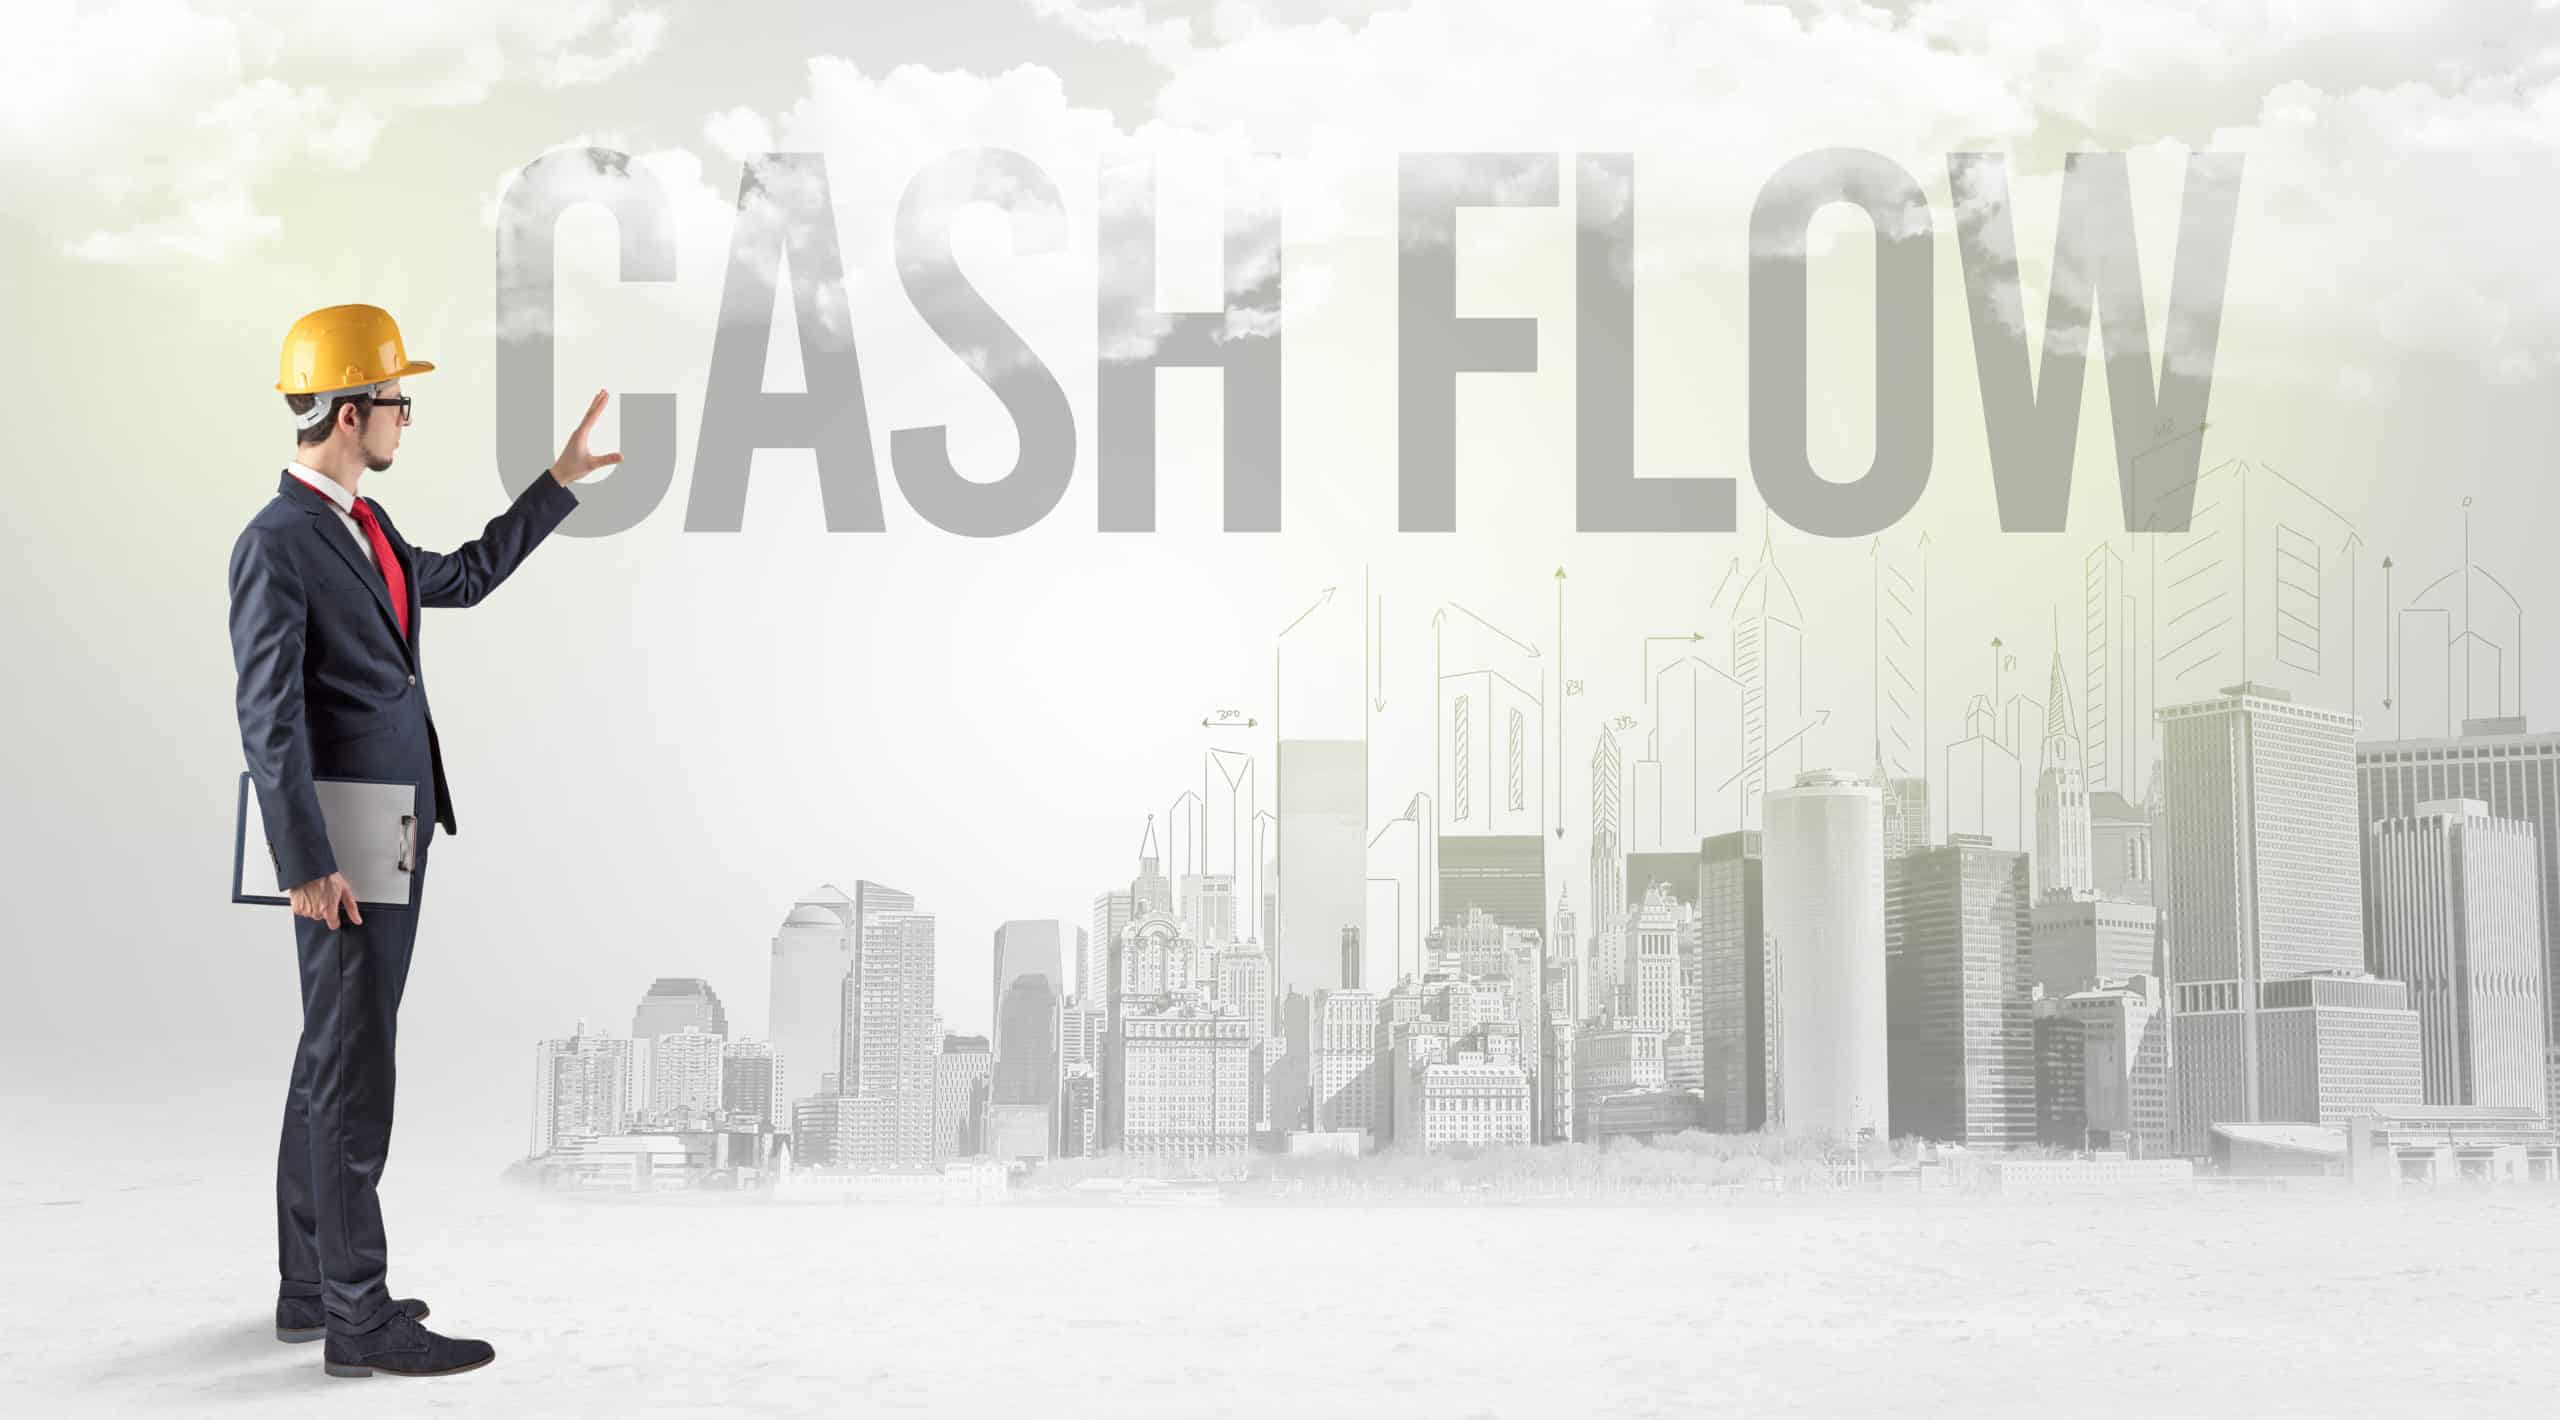 a man dressed in a suit and hard hat contemplates solving his cash flow issues while he points to the words "cash flow" in the background